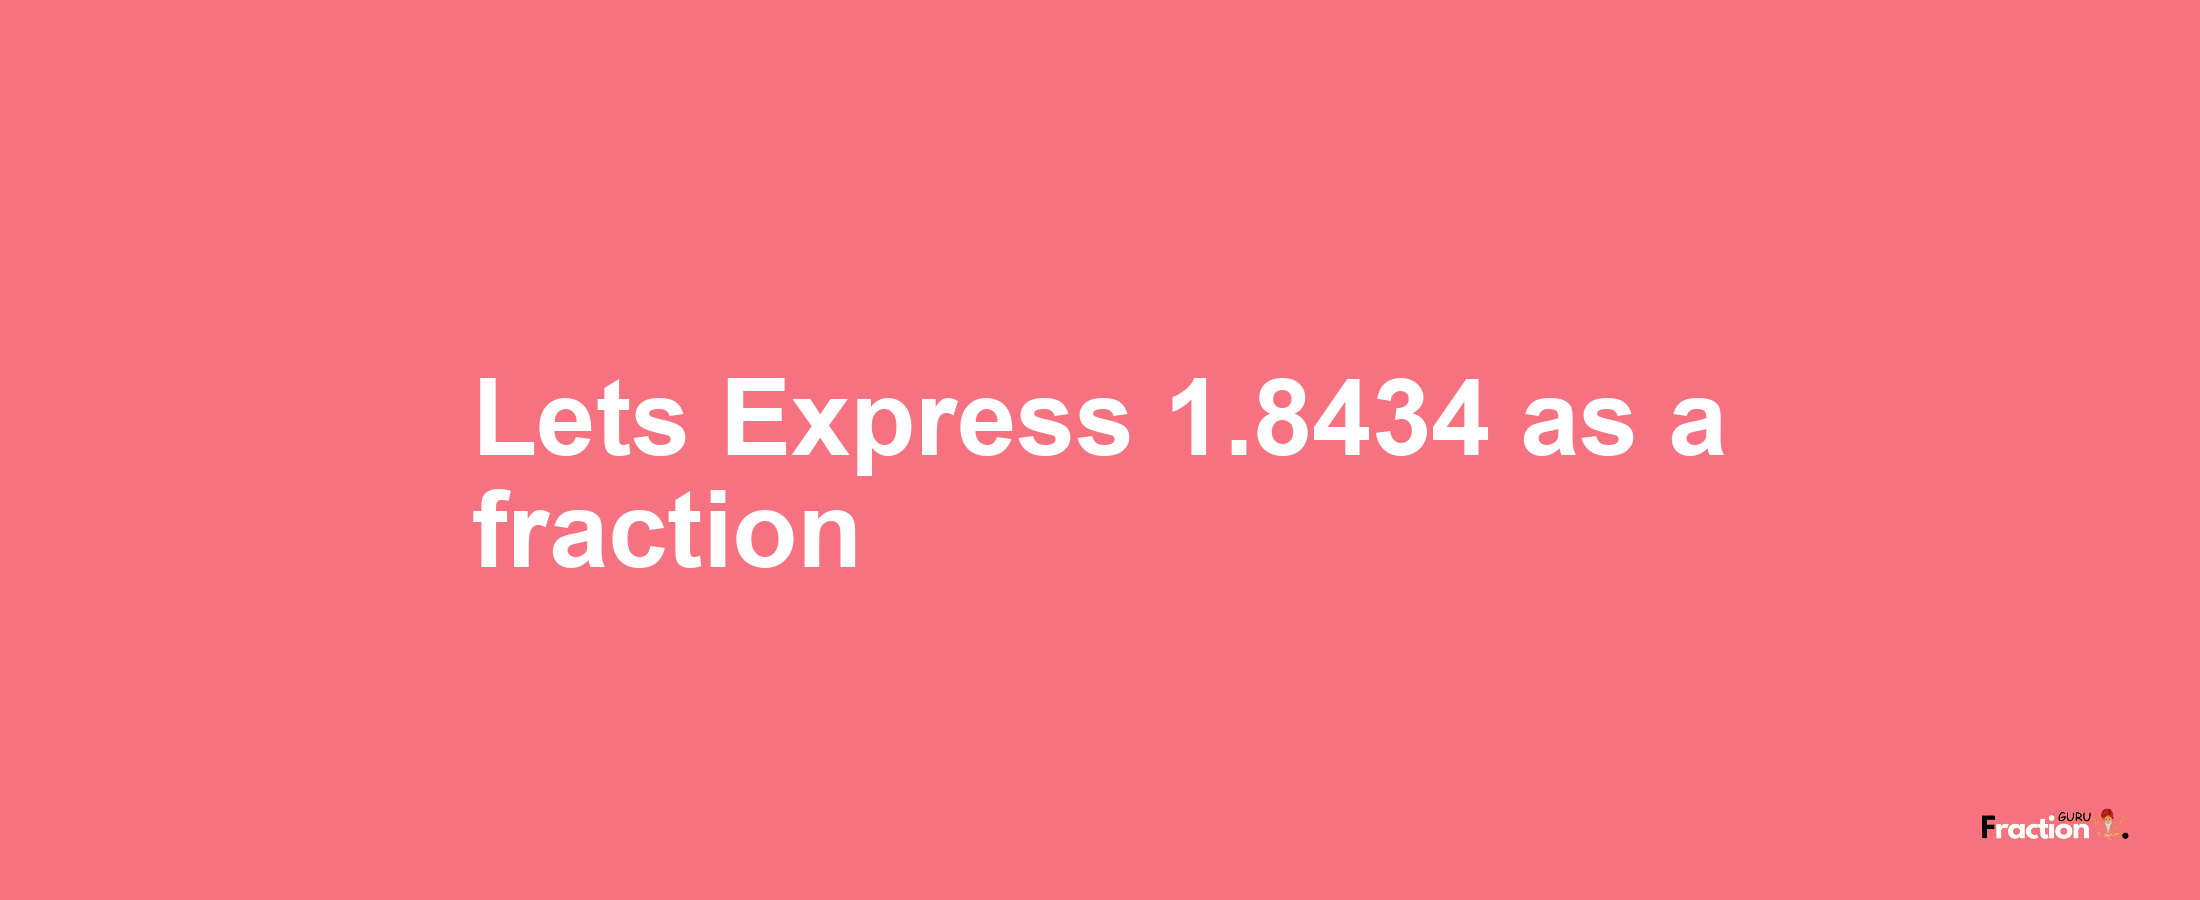 Lets Express 1.8434 as afraction